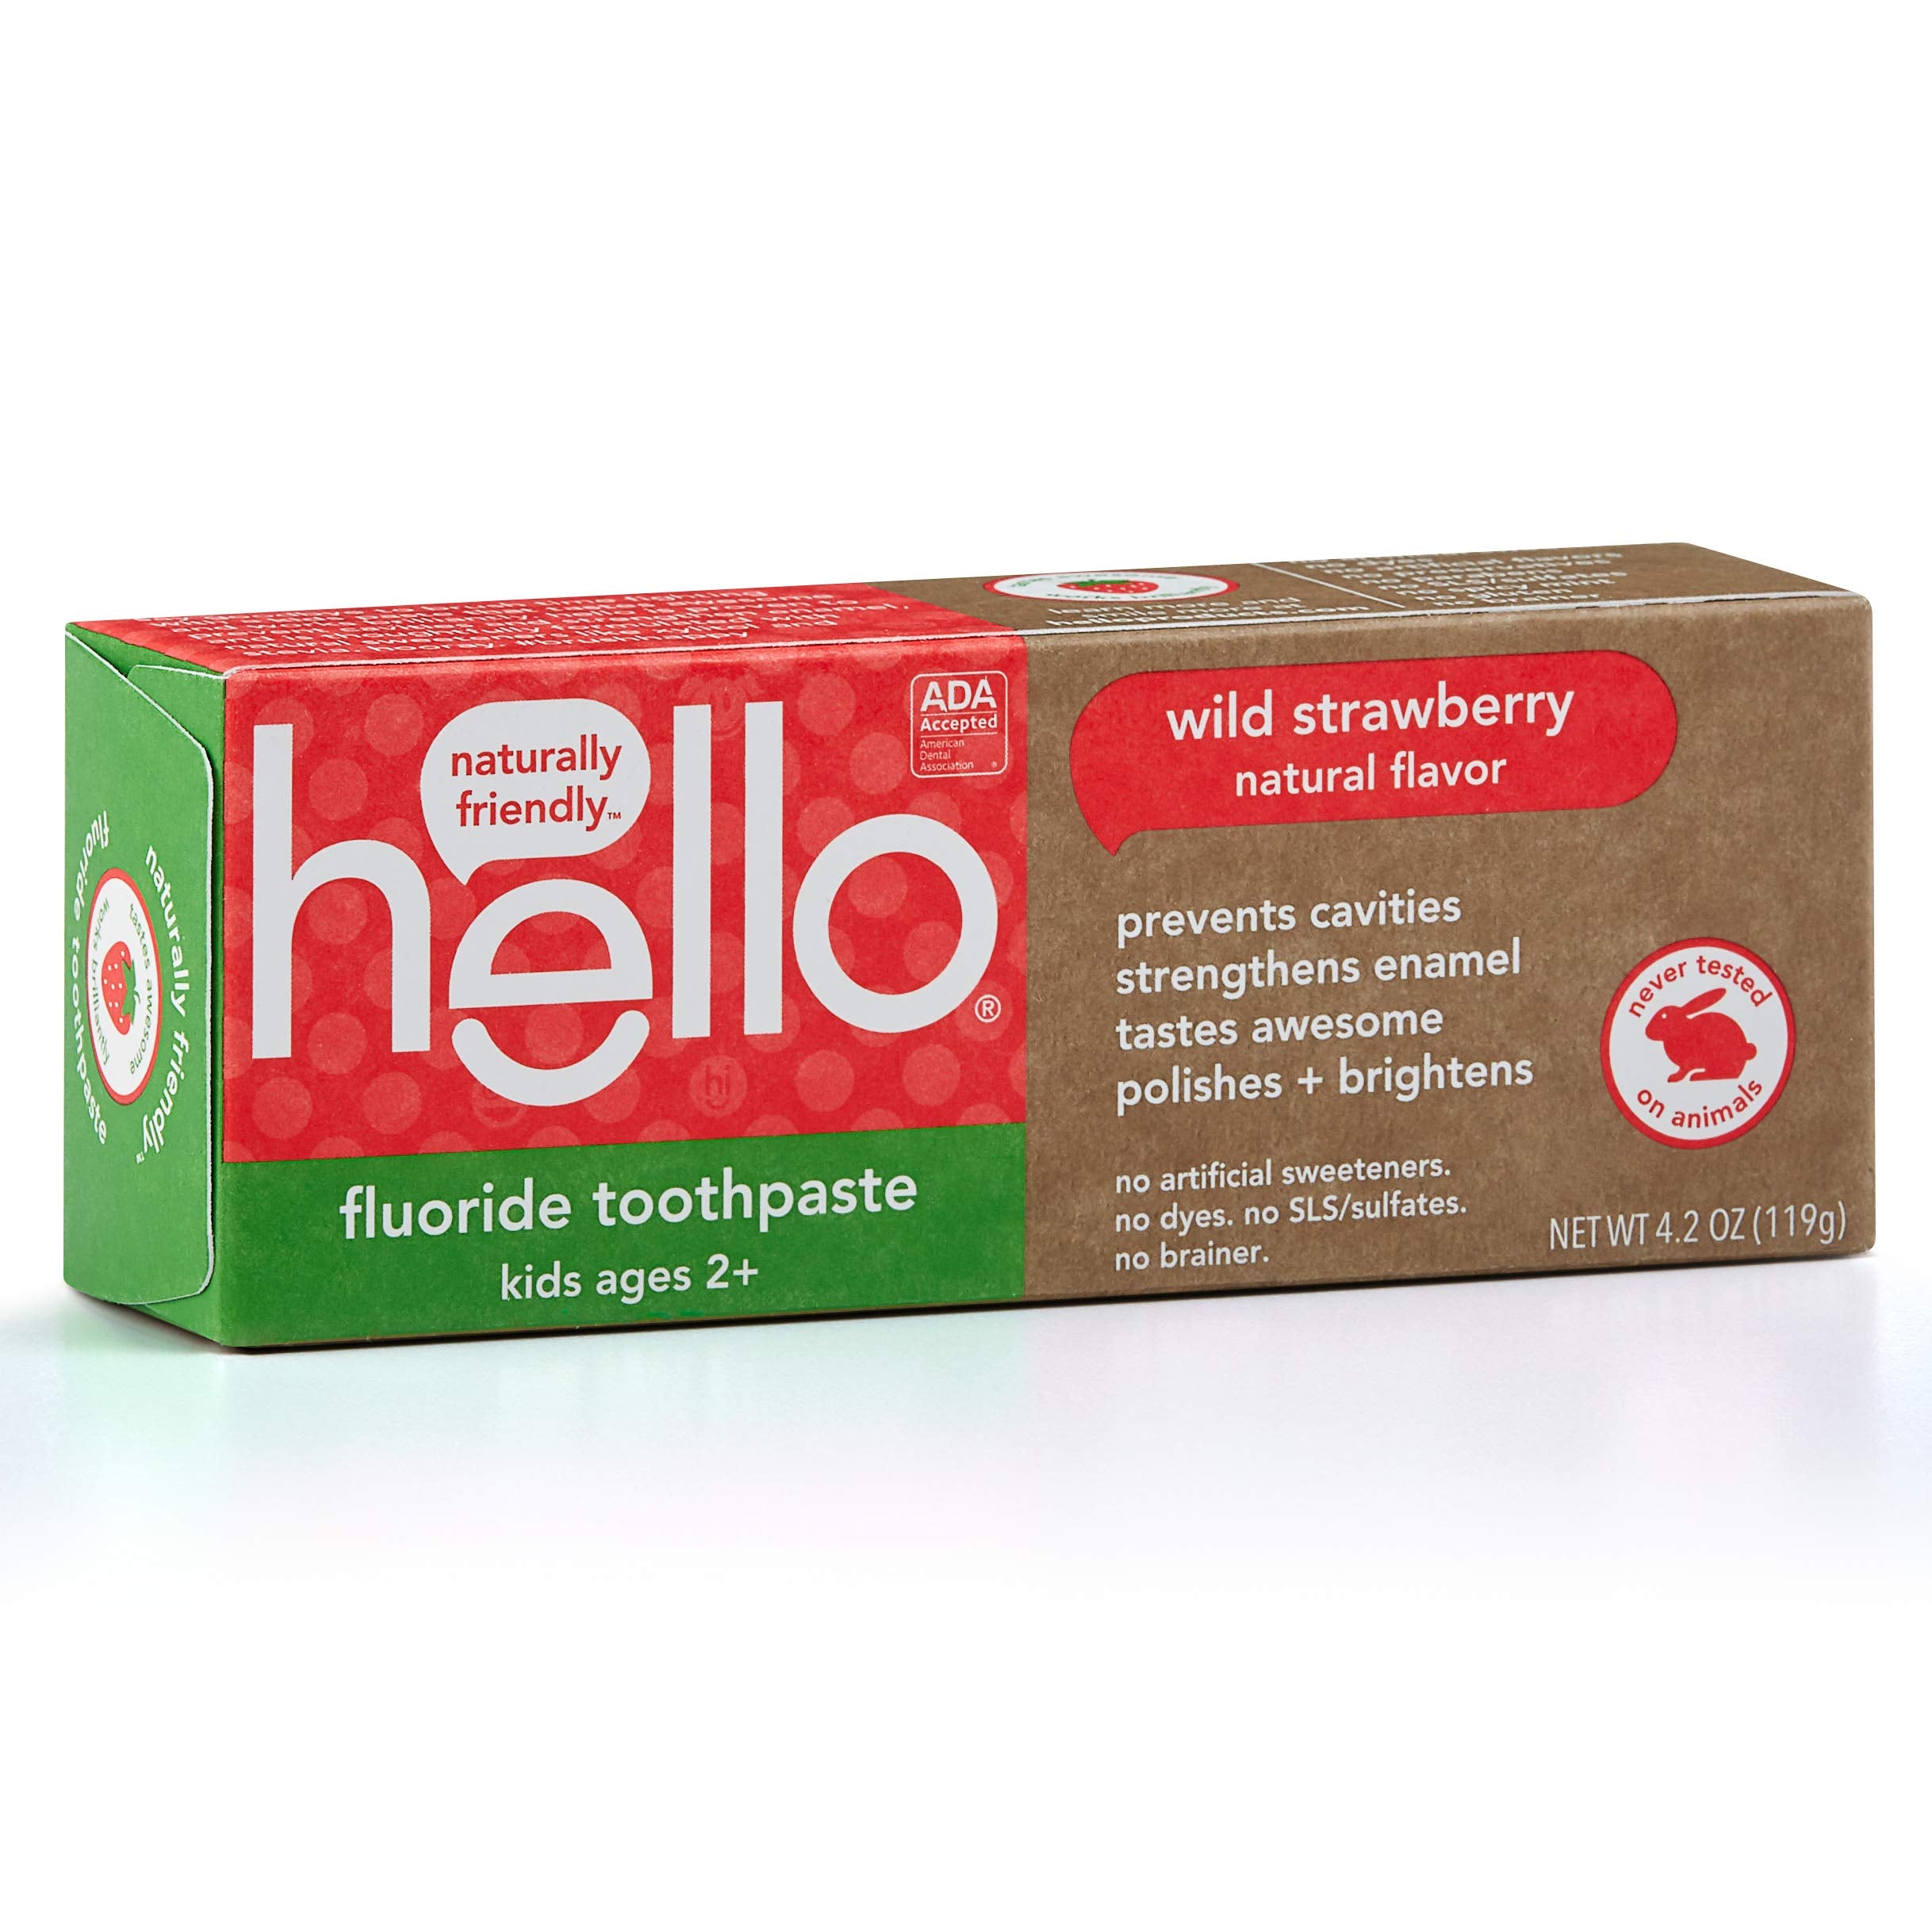 Hello Oral Care ADA Approved Fluoride Kids Toothpaste, Vegan & SLS Free, Natural Wild Strawberry Flavor, 4.2 Ounce (Pack of 1)